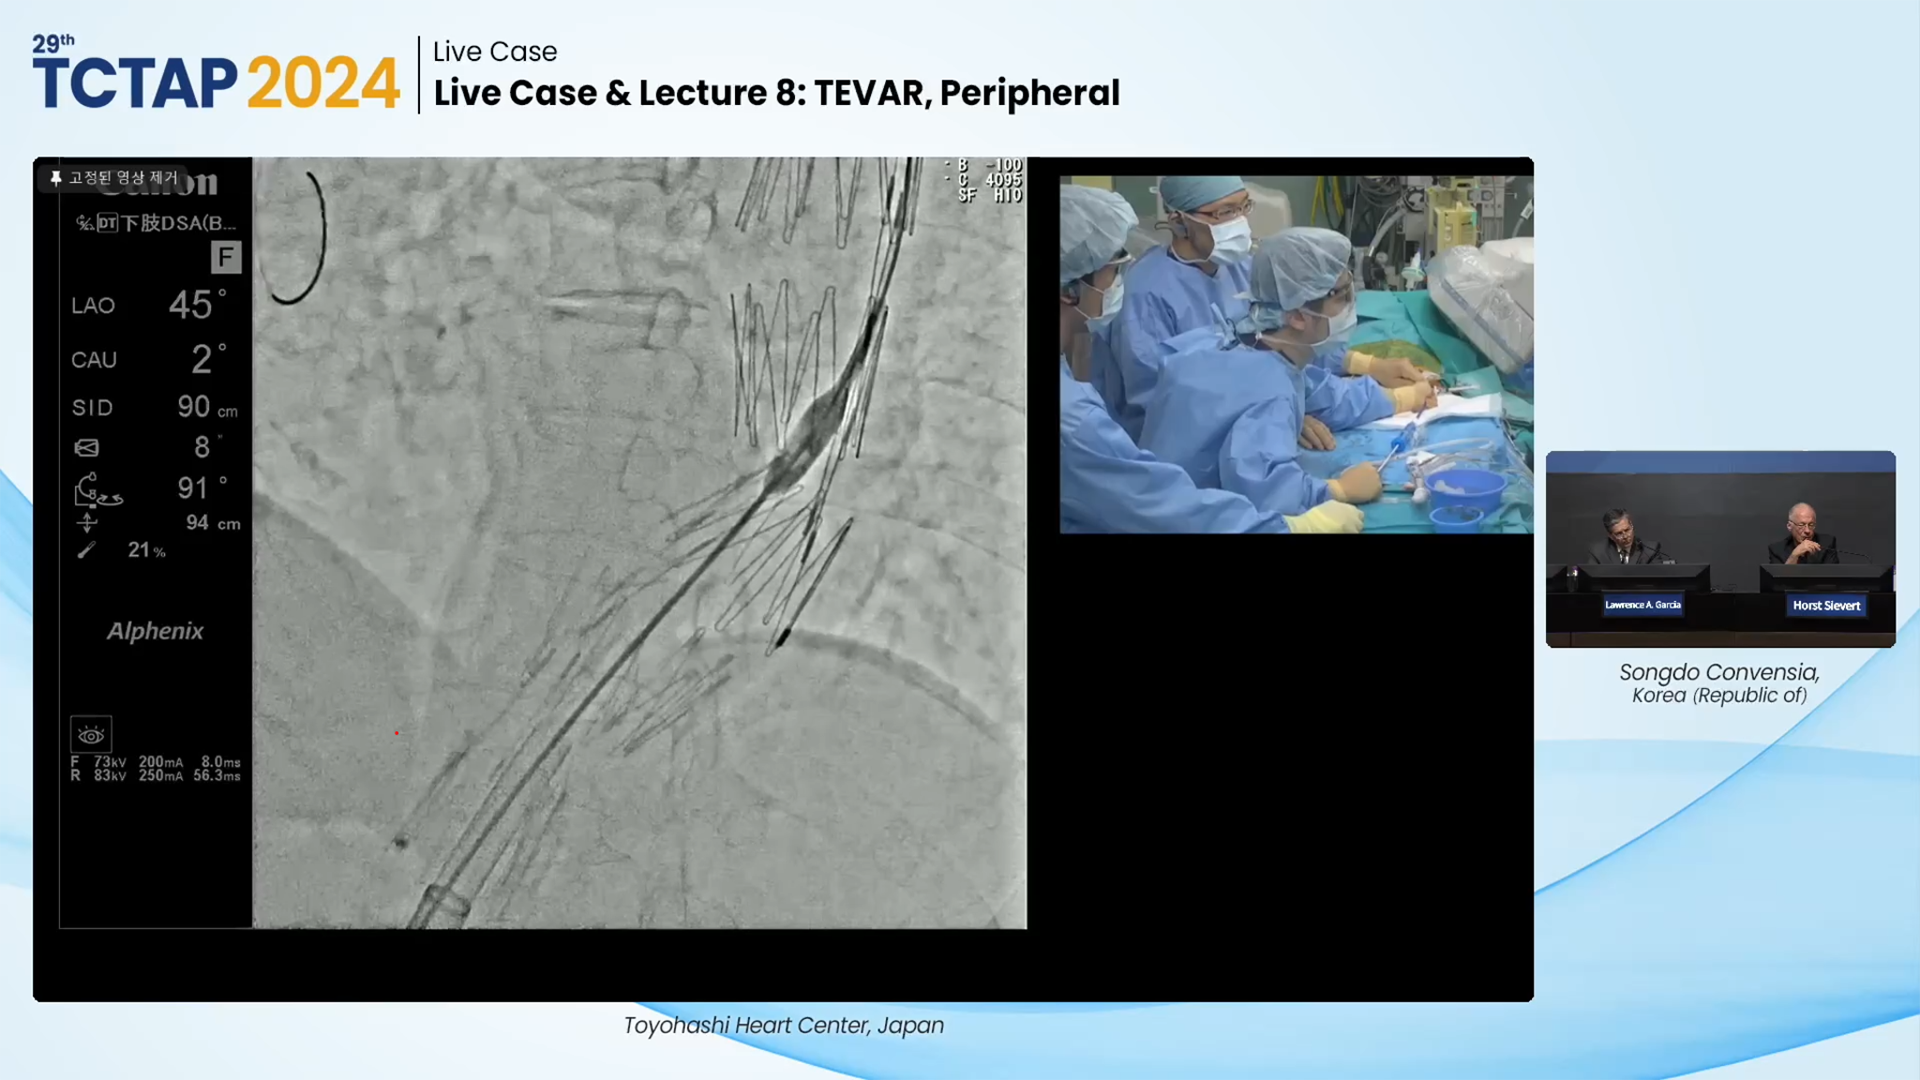 Live Case & Lecture 8: TEVAR, Peripheral